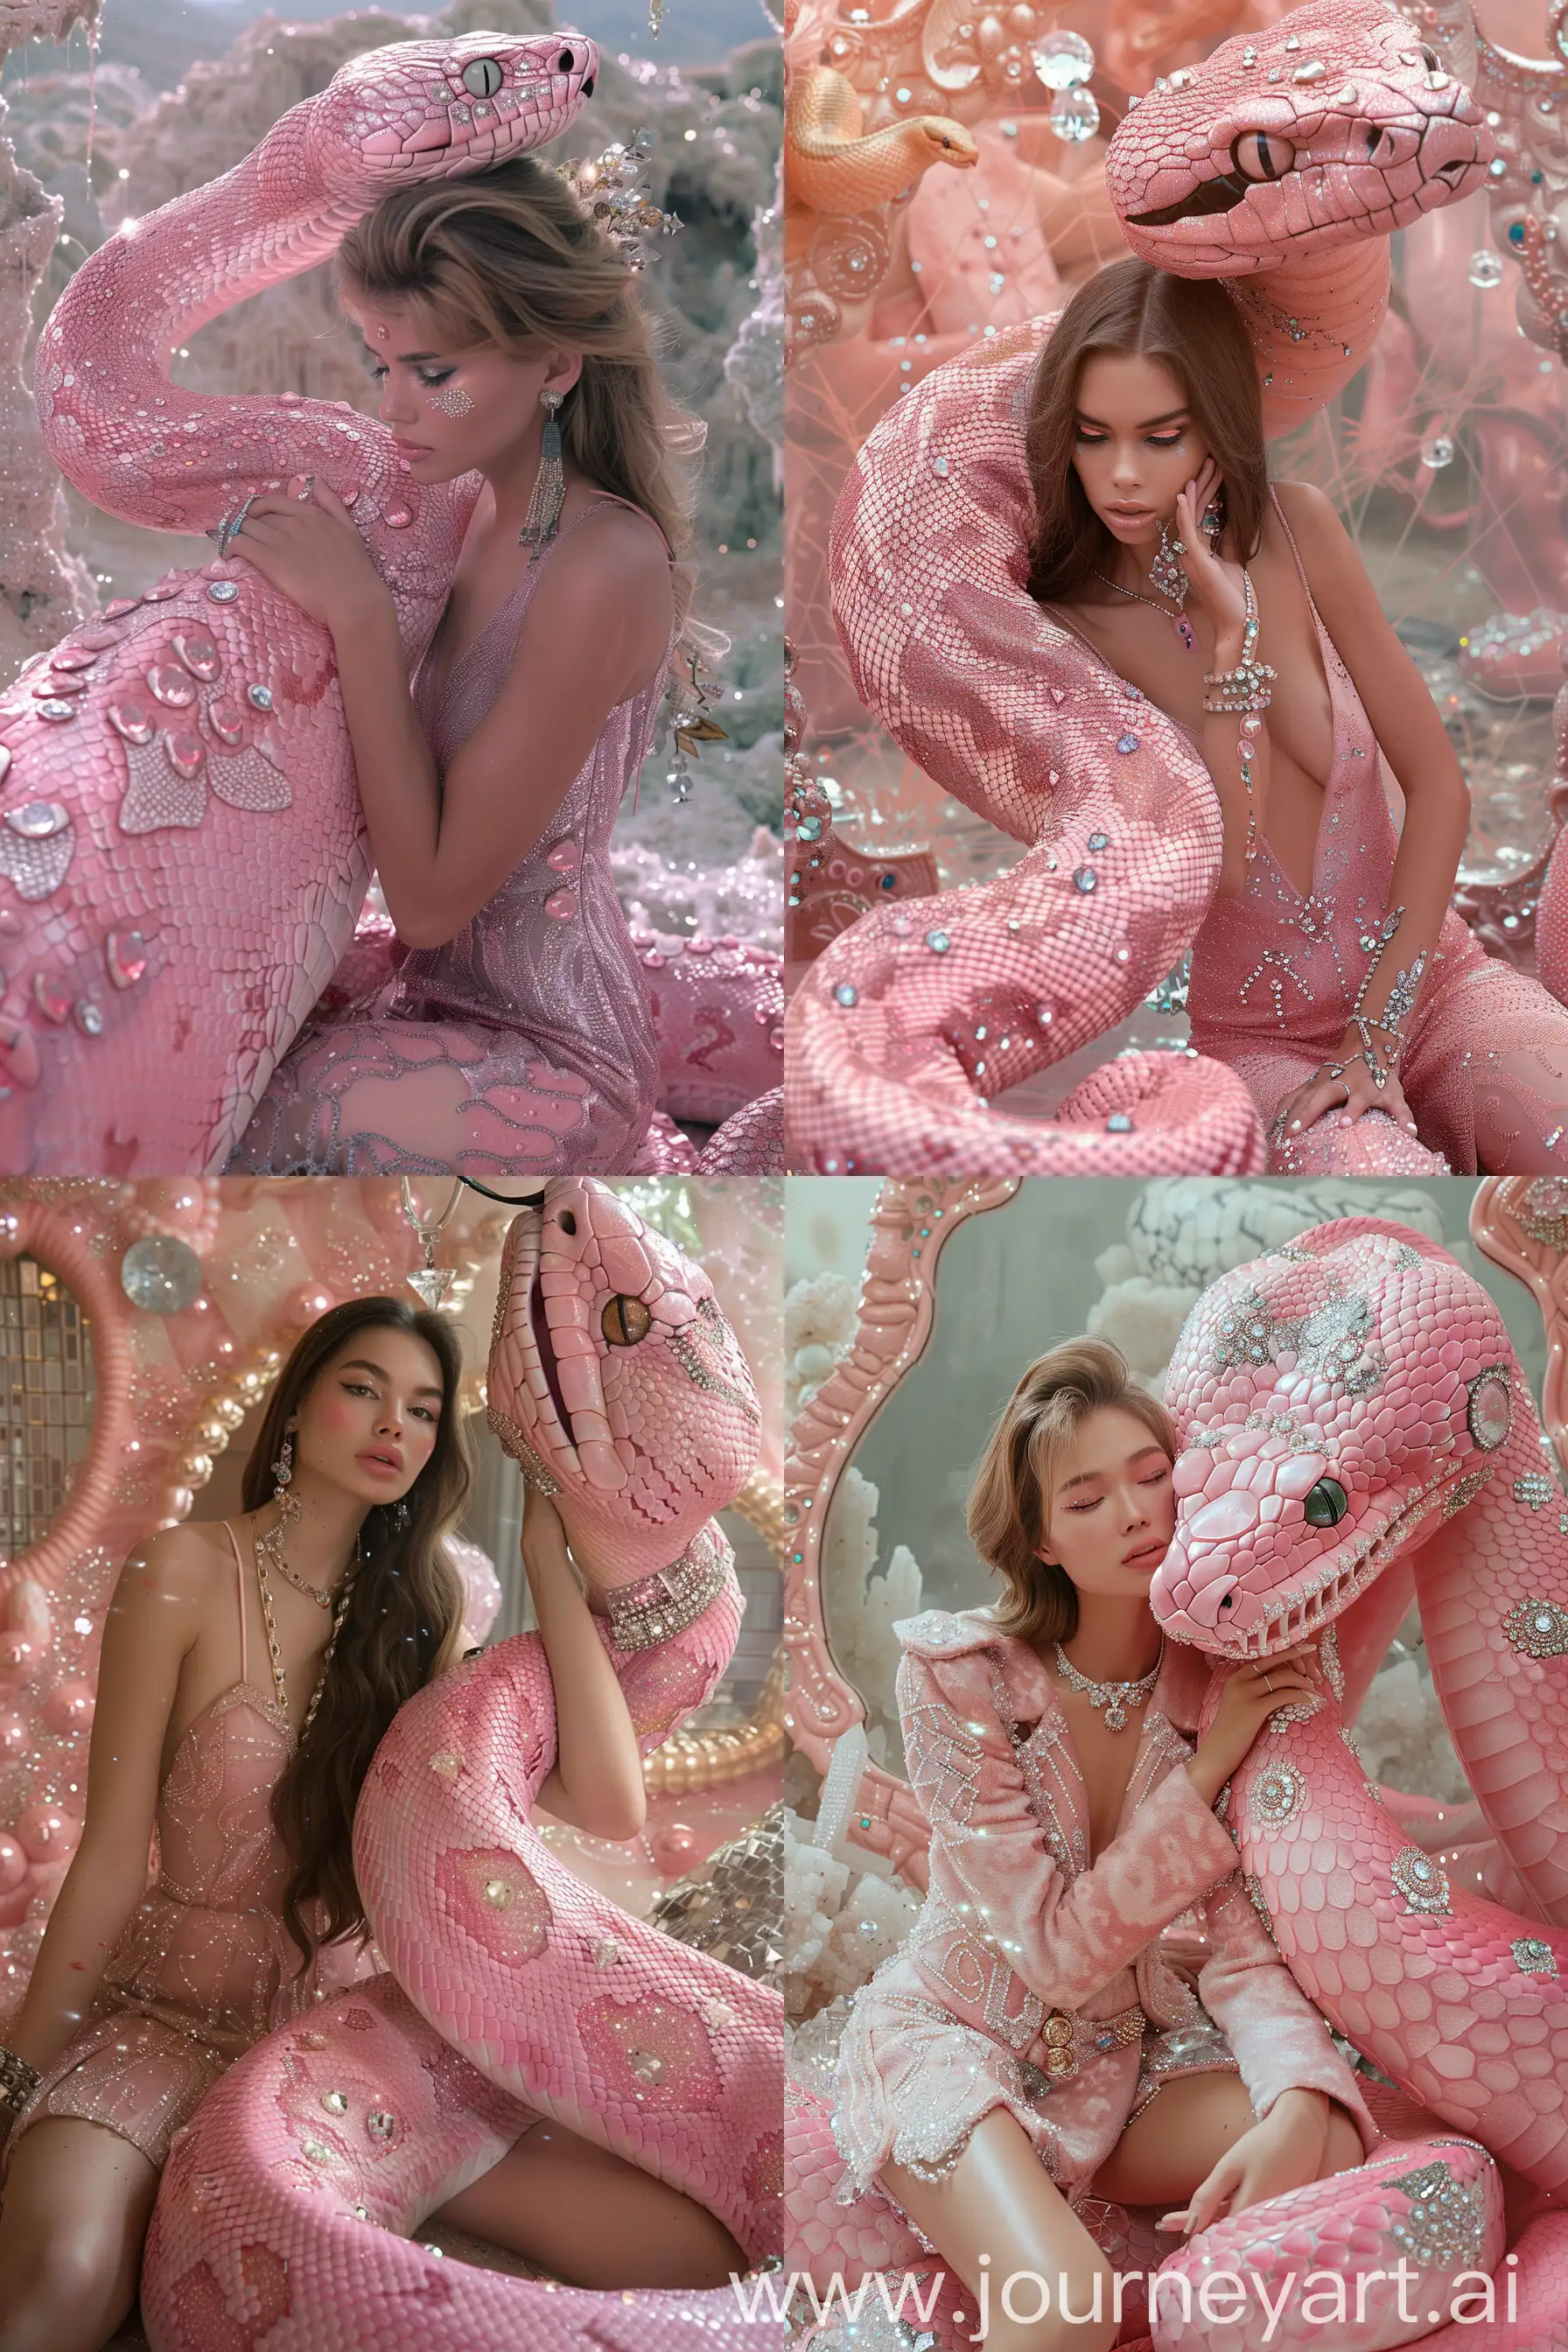 surreal photograph from a fantasy story, where a beautiful woman is sitting next to a giant pink snake, caos 50, they seem very friendly, the snake has gems and diamonds and its scales are shiny, they are in front of a very large mirror, they are like hugging each other, Everything is a fantasy atmosphere in pastel pink tones, the woman wears very modern-looking haute couture clothing with snakeskin finishes and shiny gems and wears a lot of jewelry, in the landscape there are gems, glitter and diamonds --ar 2:3 --stylize 250